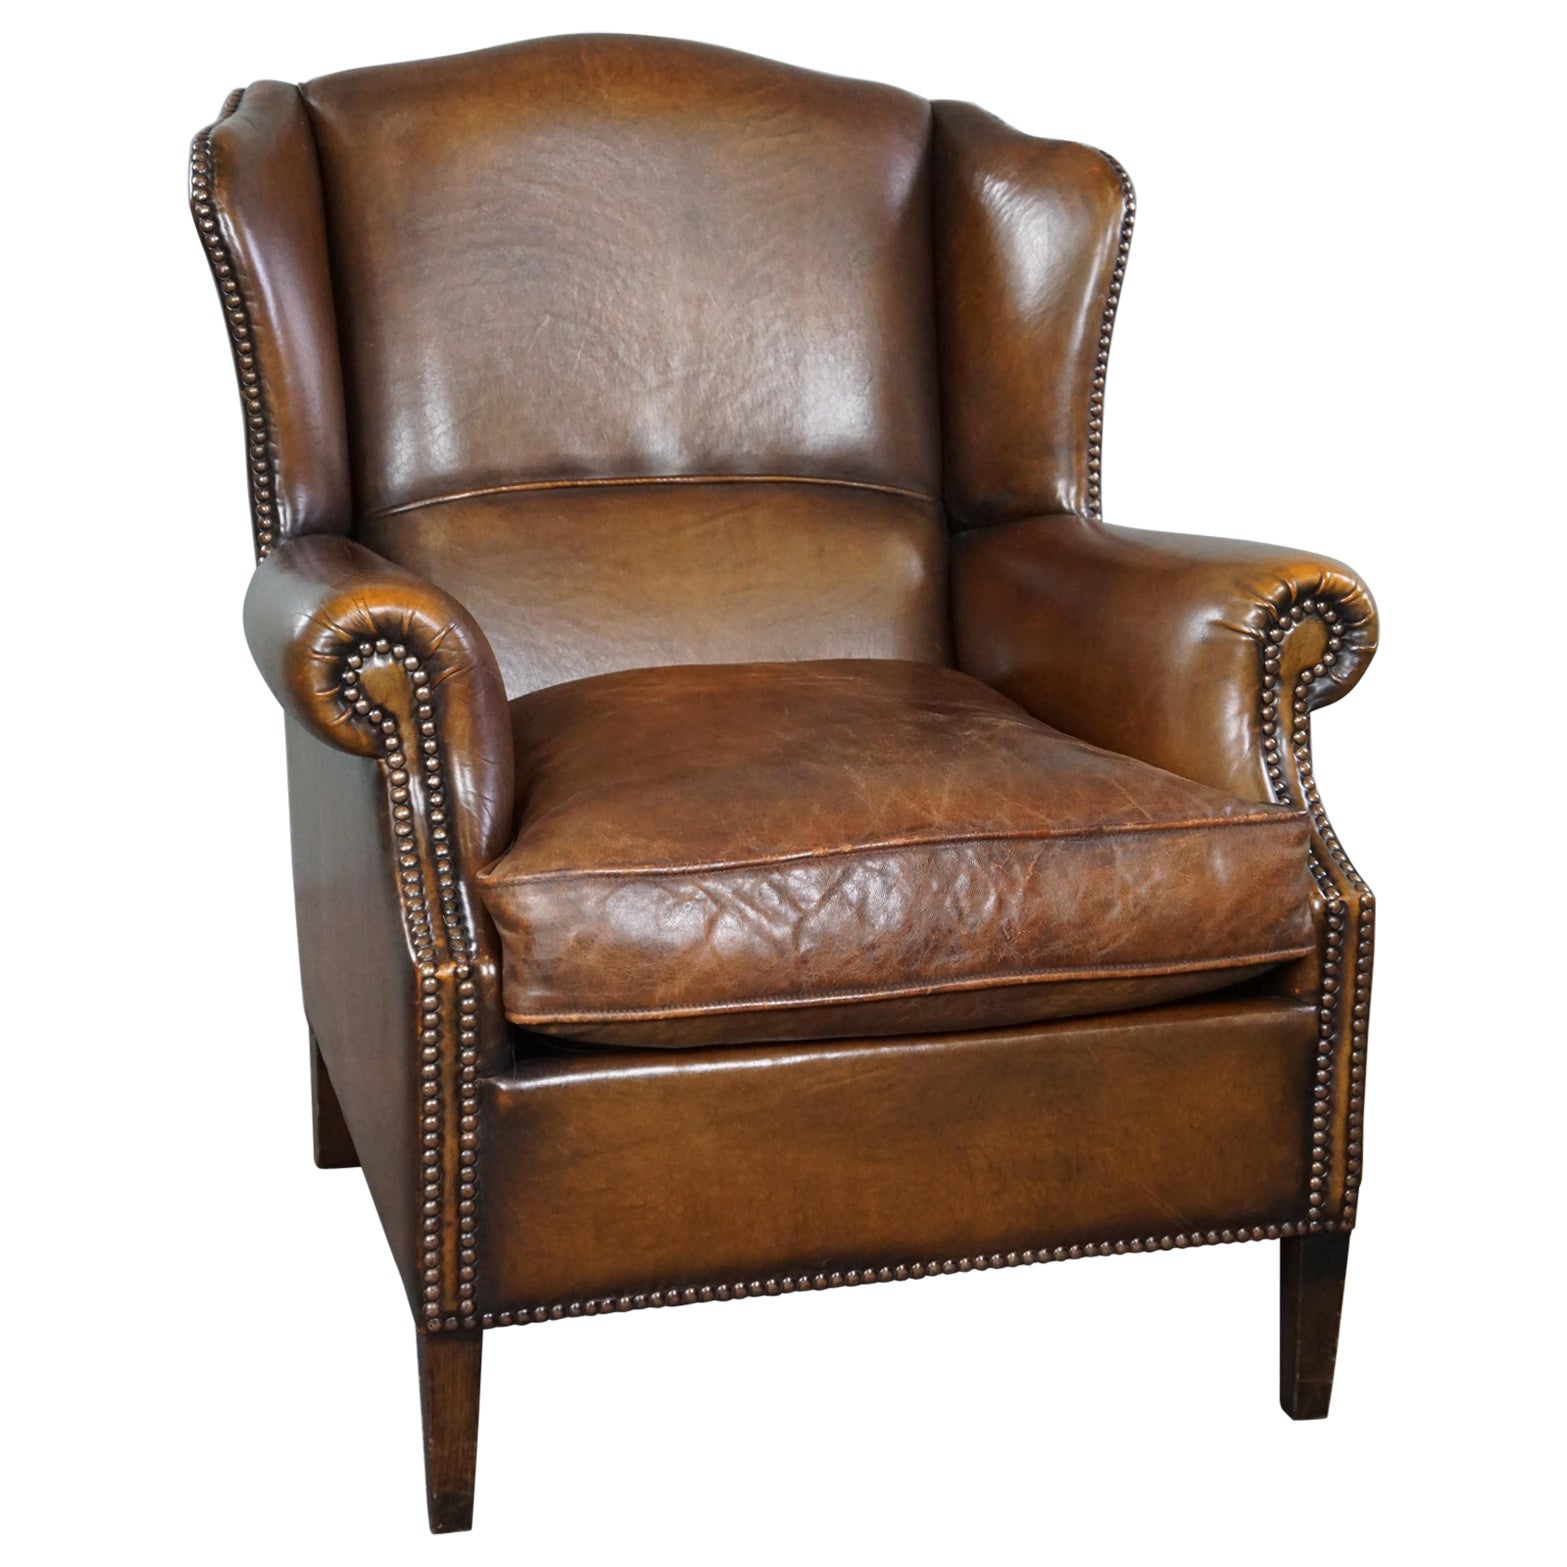 In good condition wingback chair made of sheepskin